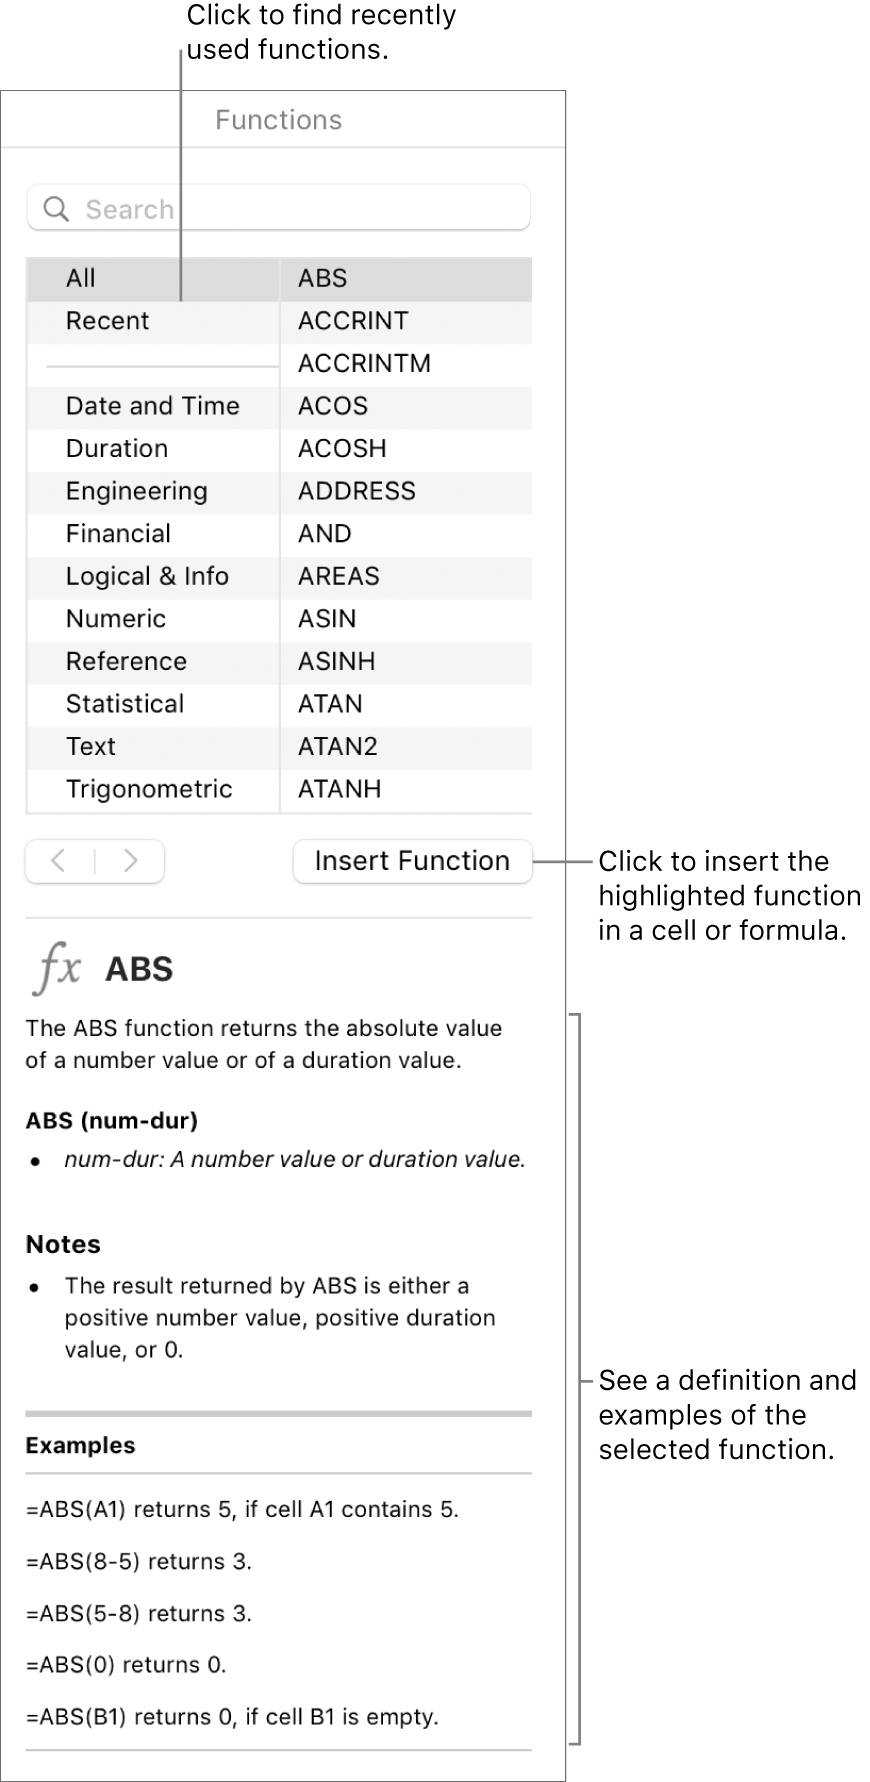 The Functions Browser with callouts to recently used functions, the Insert Function button and the function definition.